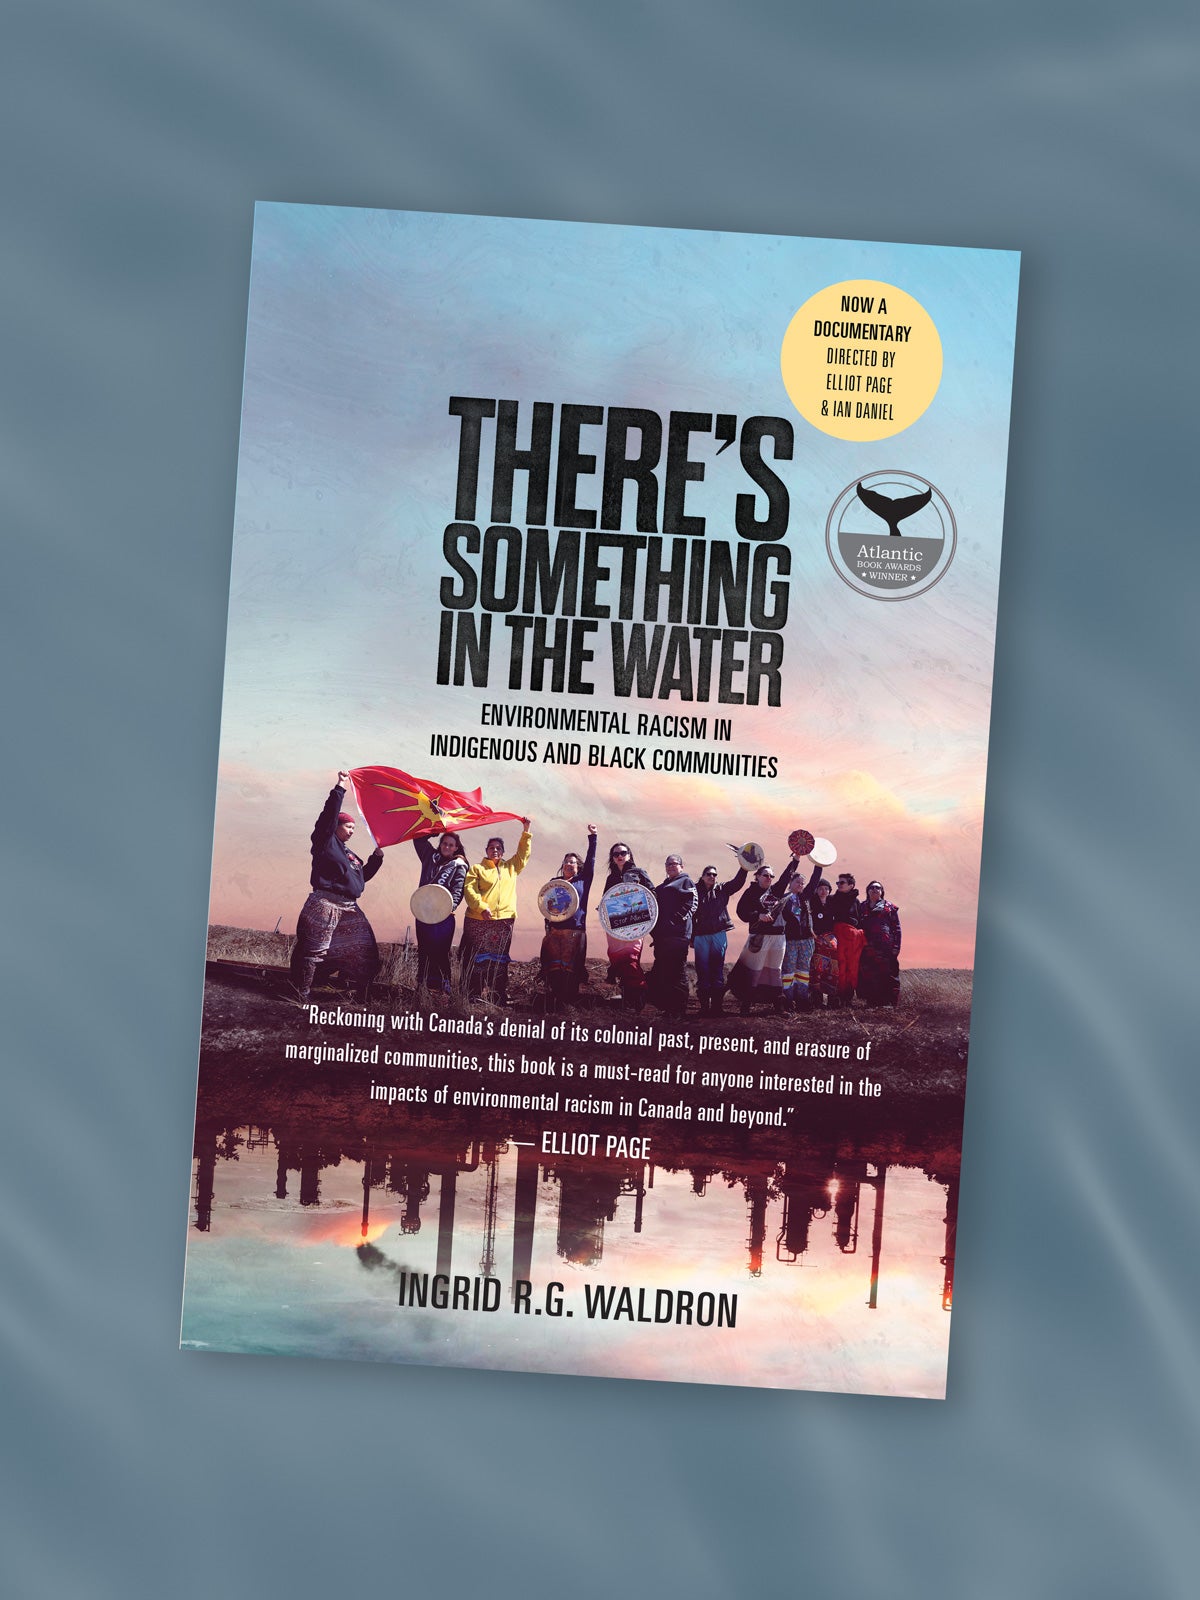 Book cover for “There’s something in the water: Environmental racism in indigenous and black communities” by Ingrid R.G. Waldron. The cover is composed on a photo of a group of indigenous people with drums and flags raised, standing near a body of water. Reflected in the water are industrial facilities and steam stacks. The book cover has two stickers in the top right: “no a documentary directed by Elliot page and Ian Daniel” and “Atlantic Book Awards Winner.” The book cover itself is on a dark watery background image.